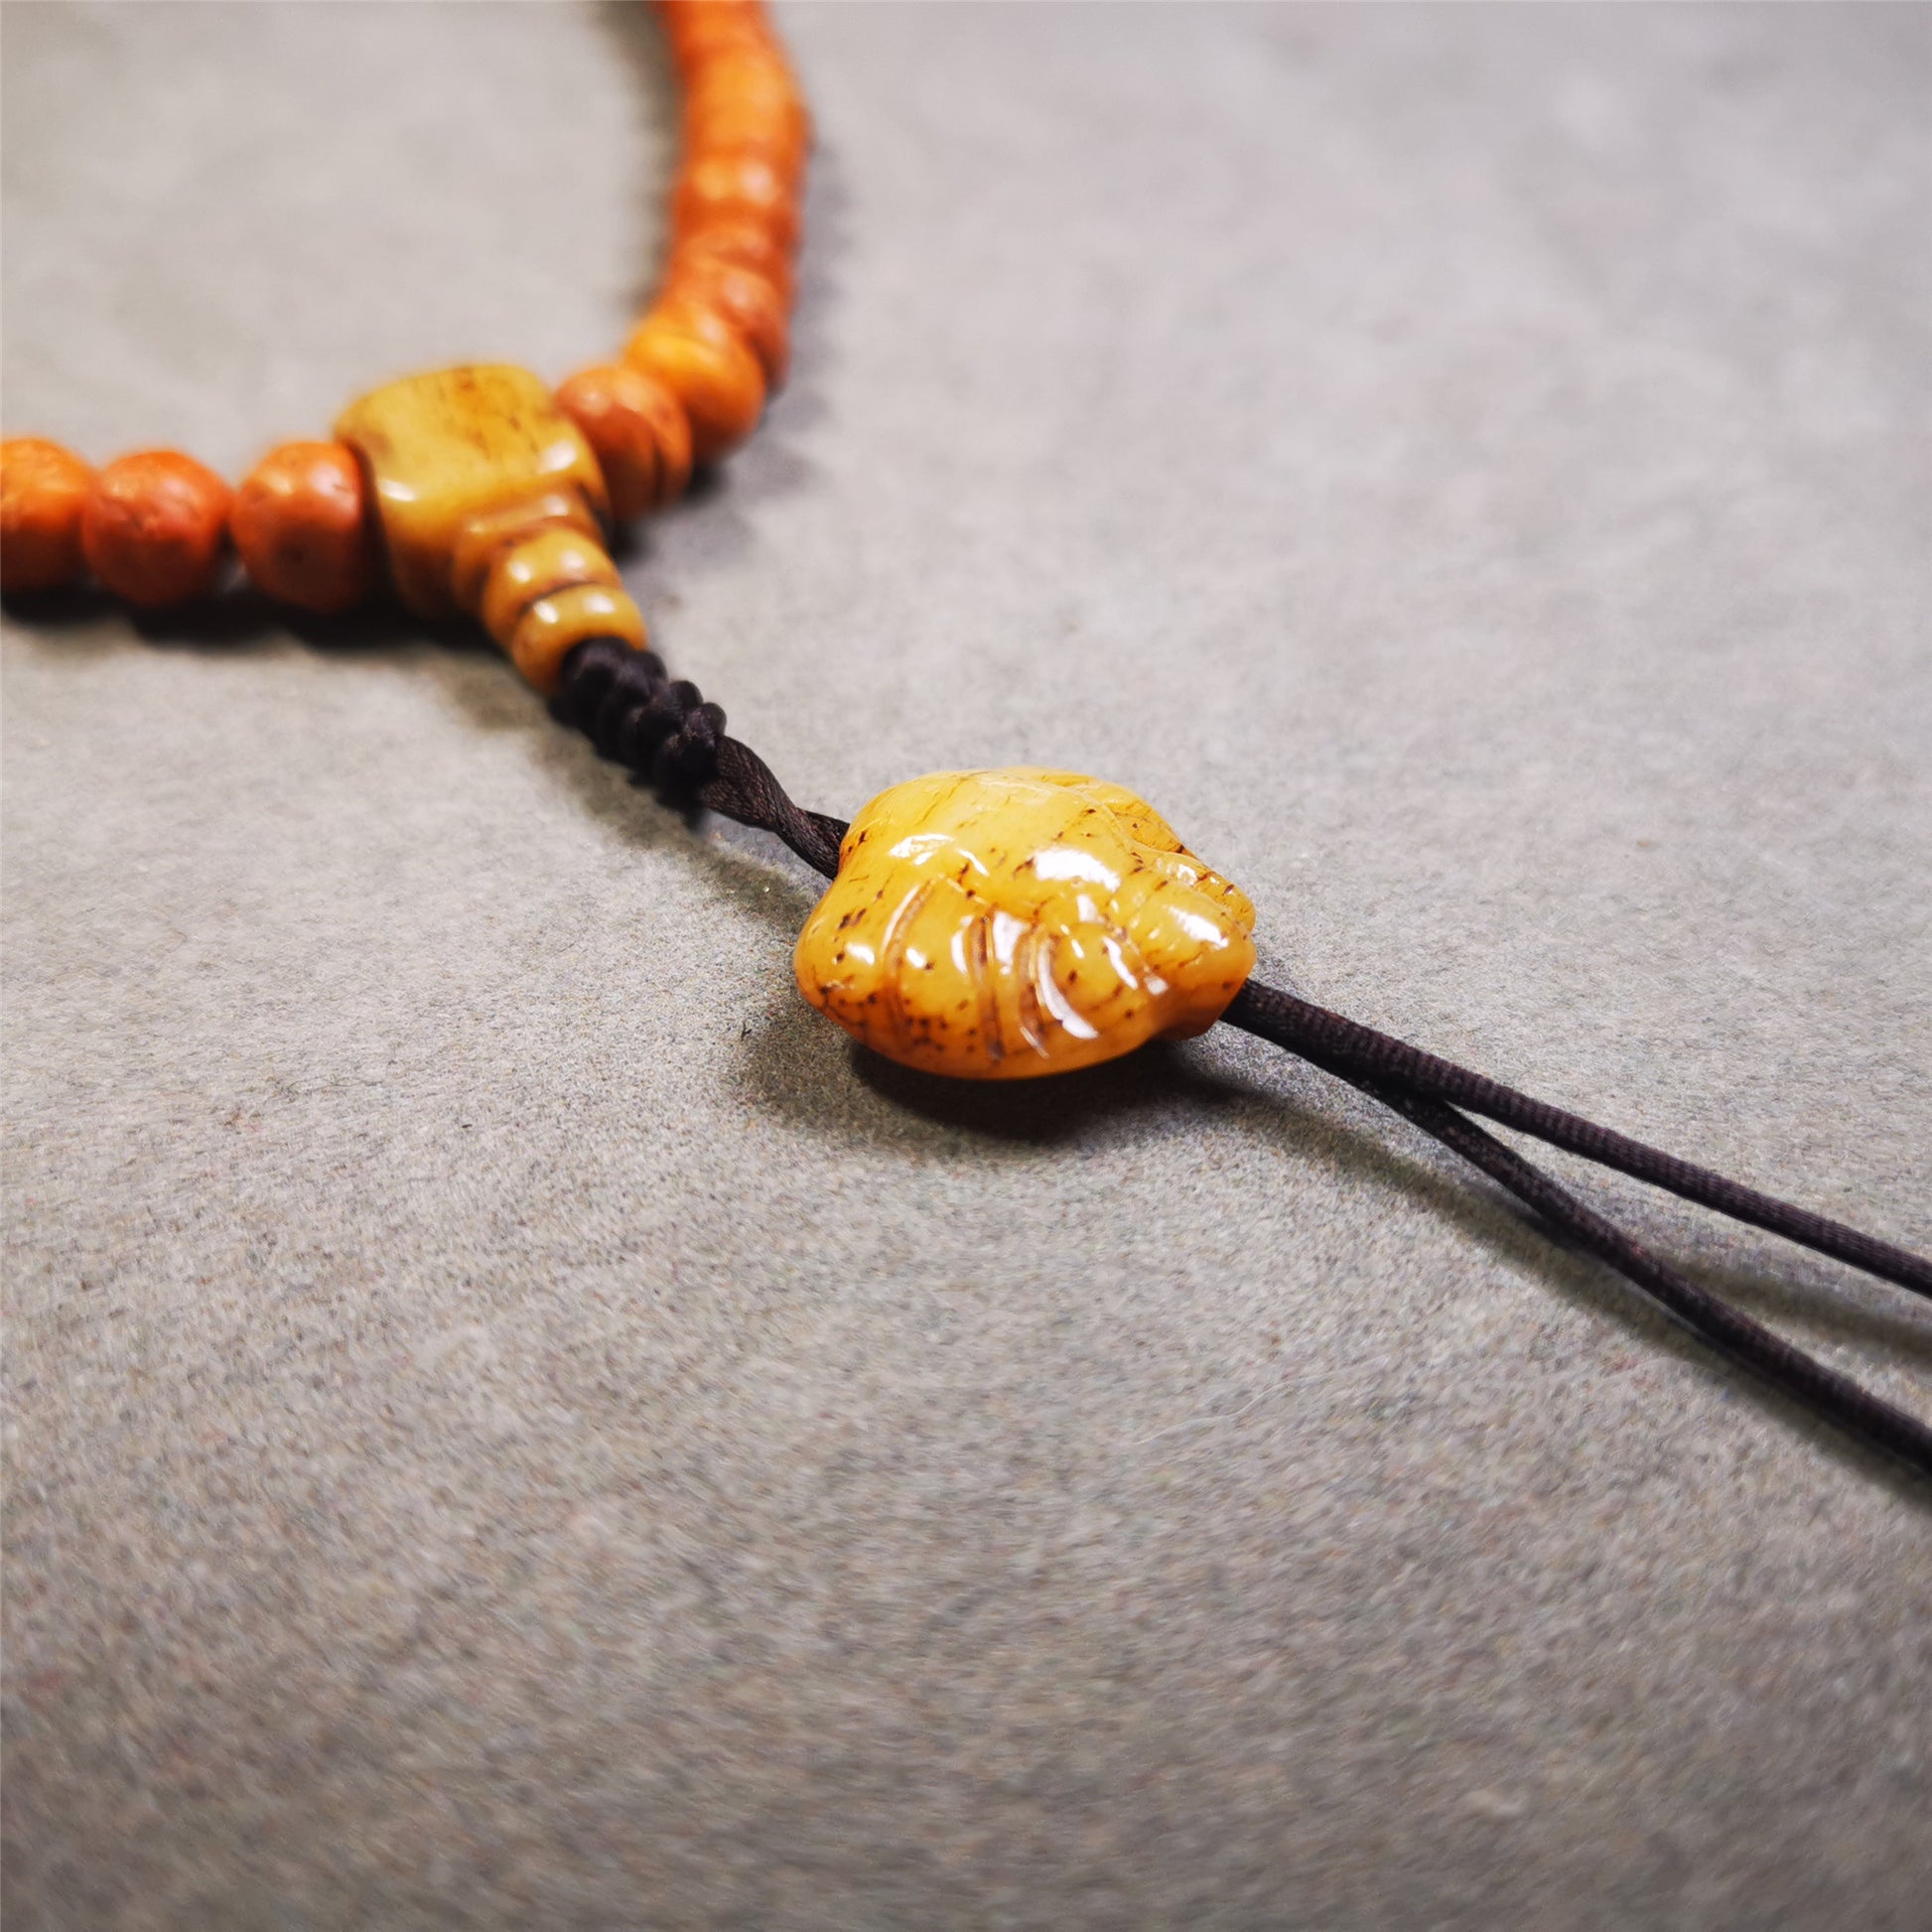 This unique bone carved scorpion pendant is made by Tibetan craftsmen.  You can make it as a mala pendant below the guru bead, or spacer bead on mala. Also can be use as pendant or keychain.